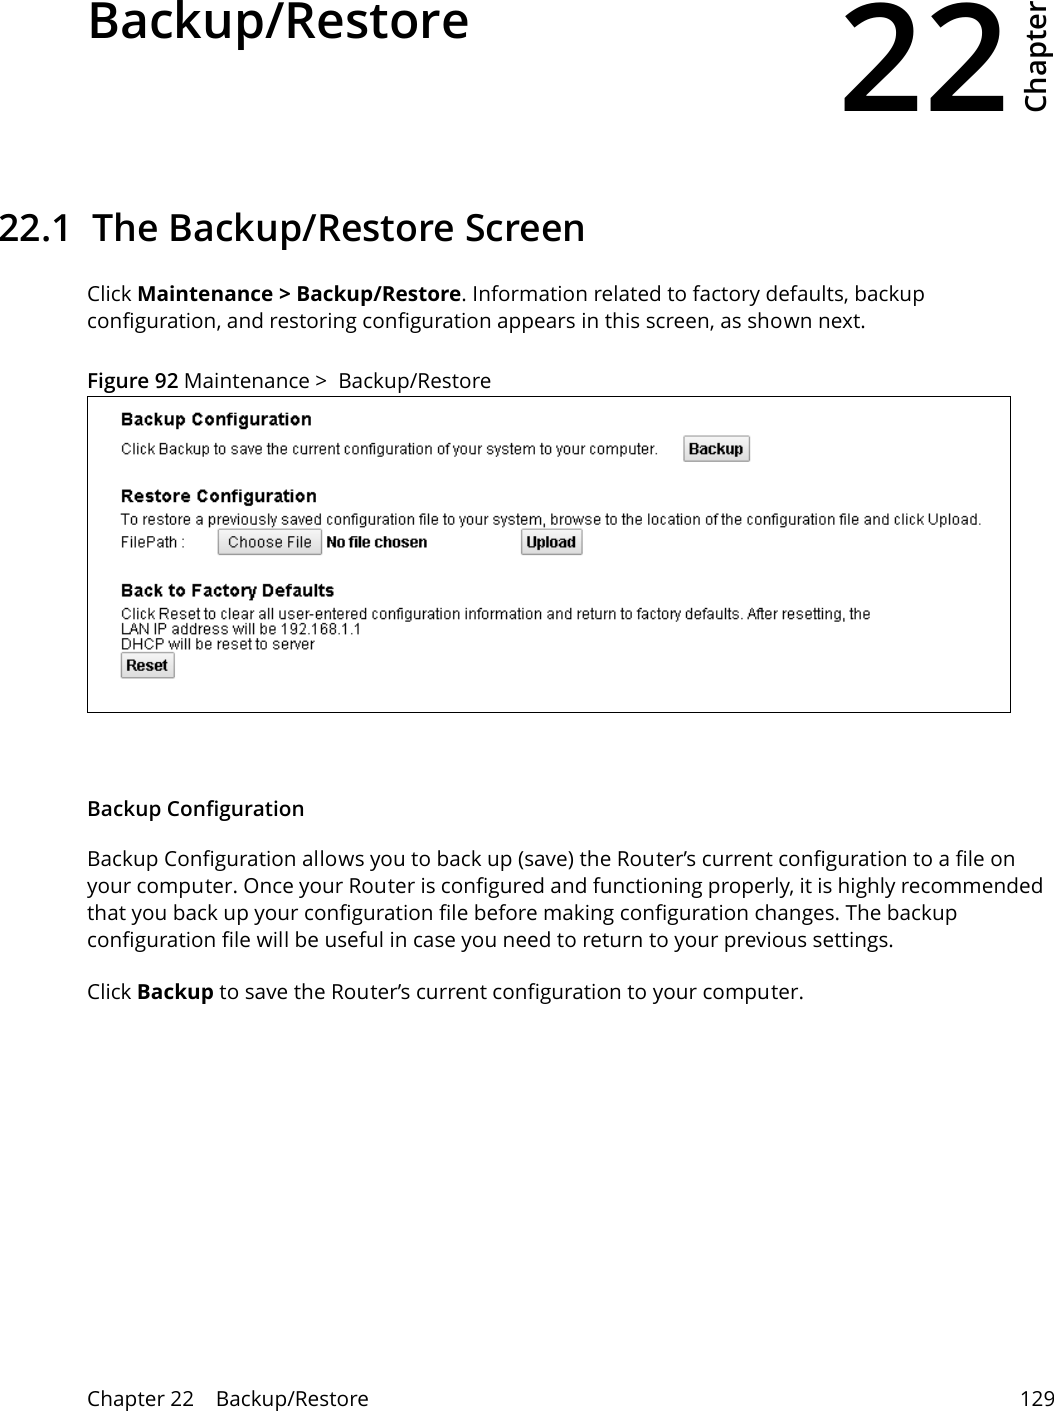 22Chapter Chapter 22    Backup/Restore 129CHAPTER 22 Chapter 22 Backup/Restore22.1  The Backup/Restore Screen Click Maintenance &gt; Backup/Restore. Information related to factory defaults, backup configuration, and restoring configuration appears in this screen, as shown next.Figure 92 Maintenance &gt;  Backup/RestoreBackup Configuration Backup Configuration allows you to back up (save) the Router’s current configuration to a file on your computer. Once your Router is configured and functioning properly, it is highly recommended that you back up your configuration file before making configuration changes. The backup configuration file will be useful in case you need to return to your previous settings. Click Backup to save the Router’s current configuration to your computer.